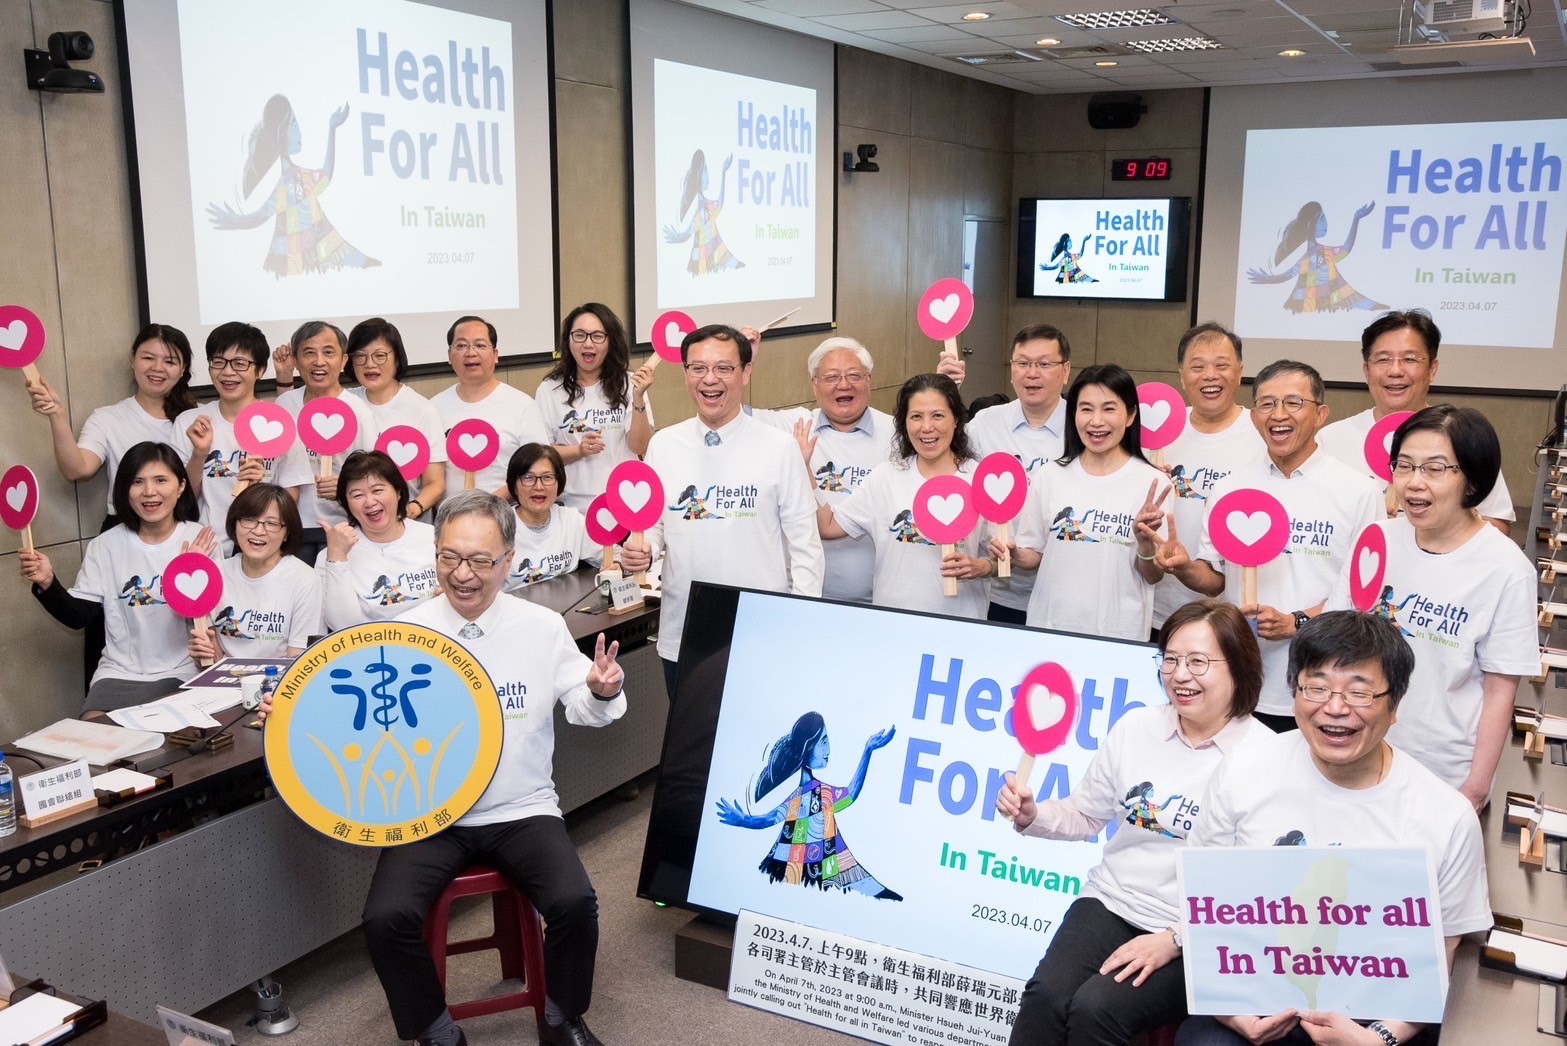 On April 7, 2023, at 9:00 AM Taipei time, Minister Hsueh Jui-yuan (leftmost) of the Ministry of Heal